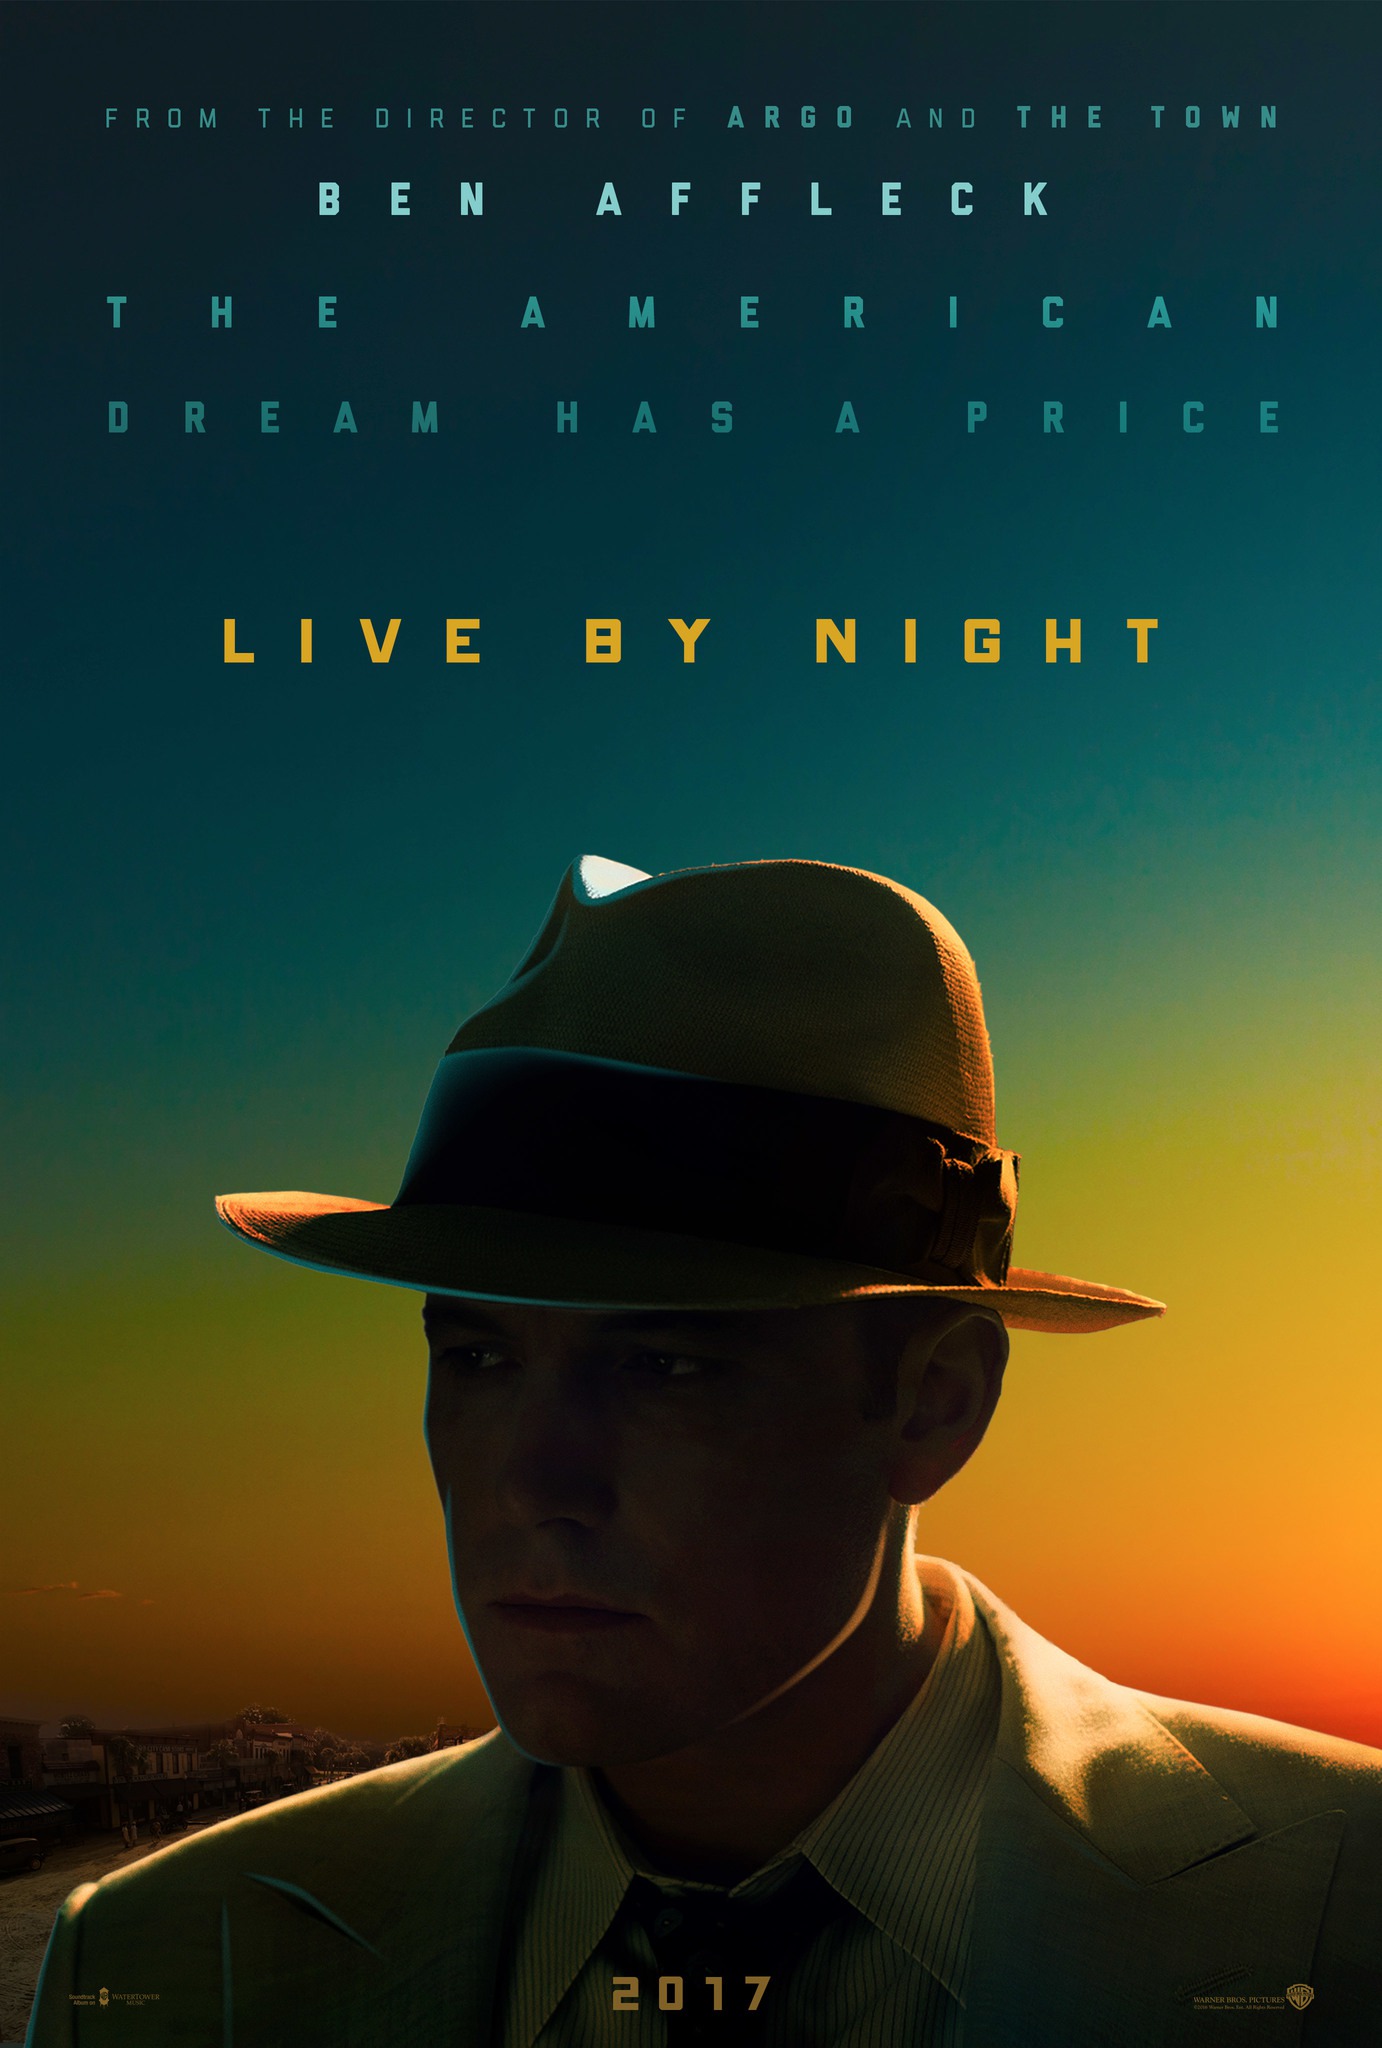 Live By Night Wallpaper Free - Live By Night Poster - HD Wallpaper 